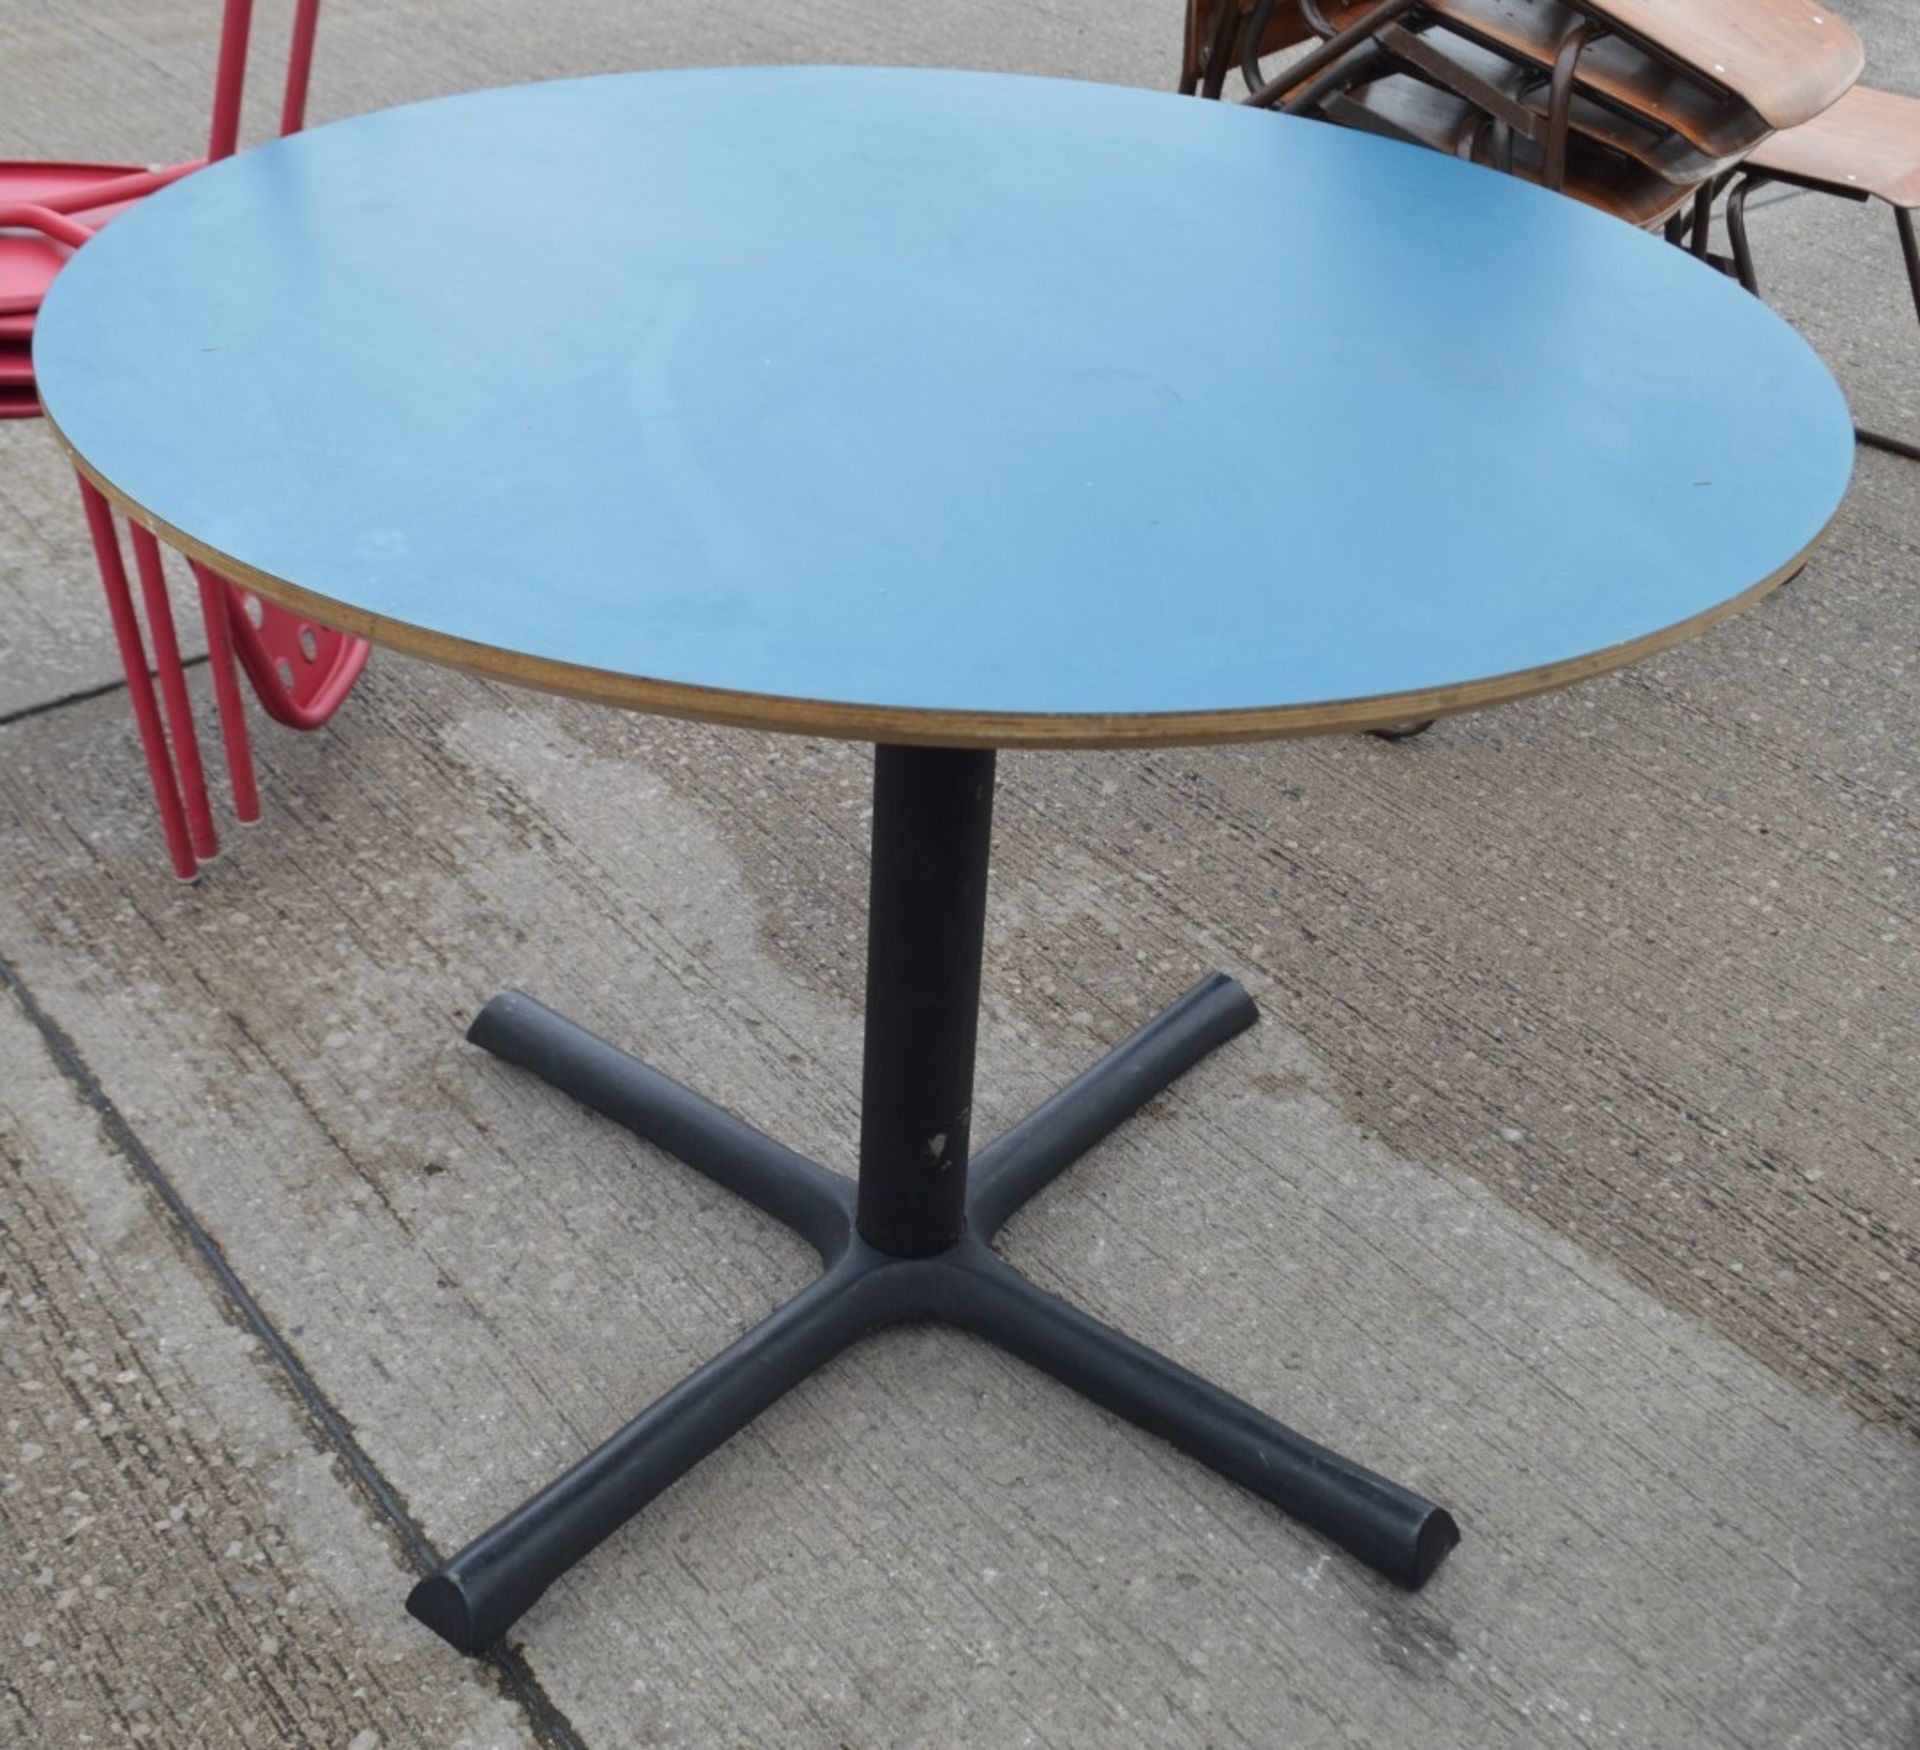 3 x Round Bistro Tables In Yellow And Teal - Dimensions: Diameter 100 x H74cm - Ref: WCH107 - Image 2 of 2